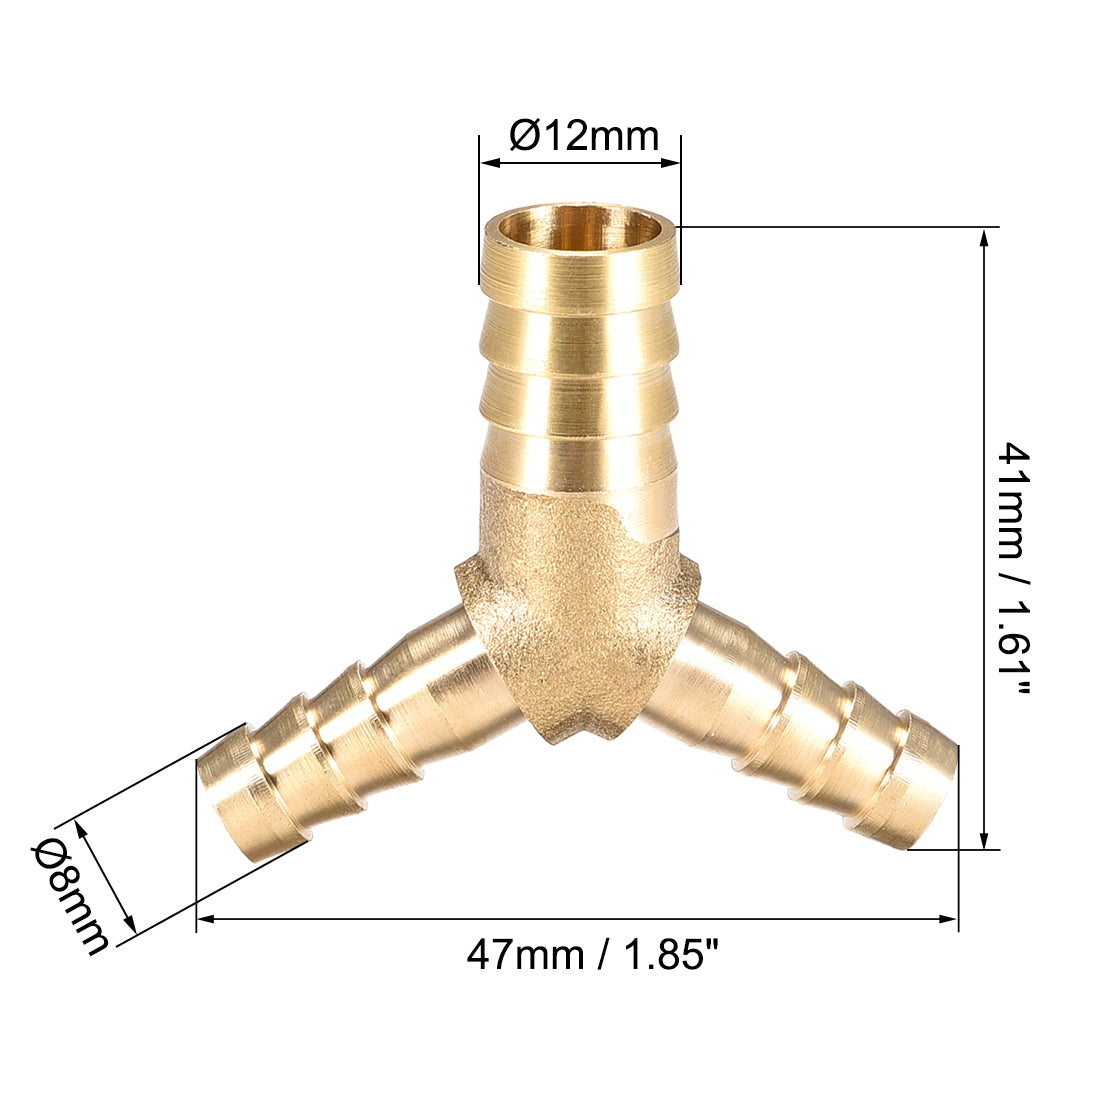 Uxcell Uxcell 10x6x6mm Hose ID Brass Reducer Barb Fitting Y-Shaped 3 Way Tee Connector Adapter